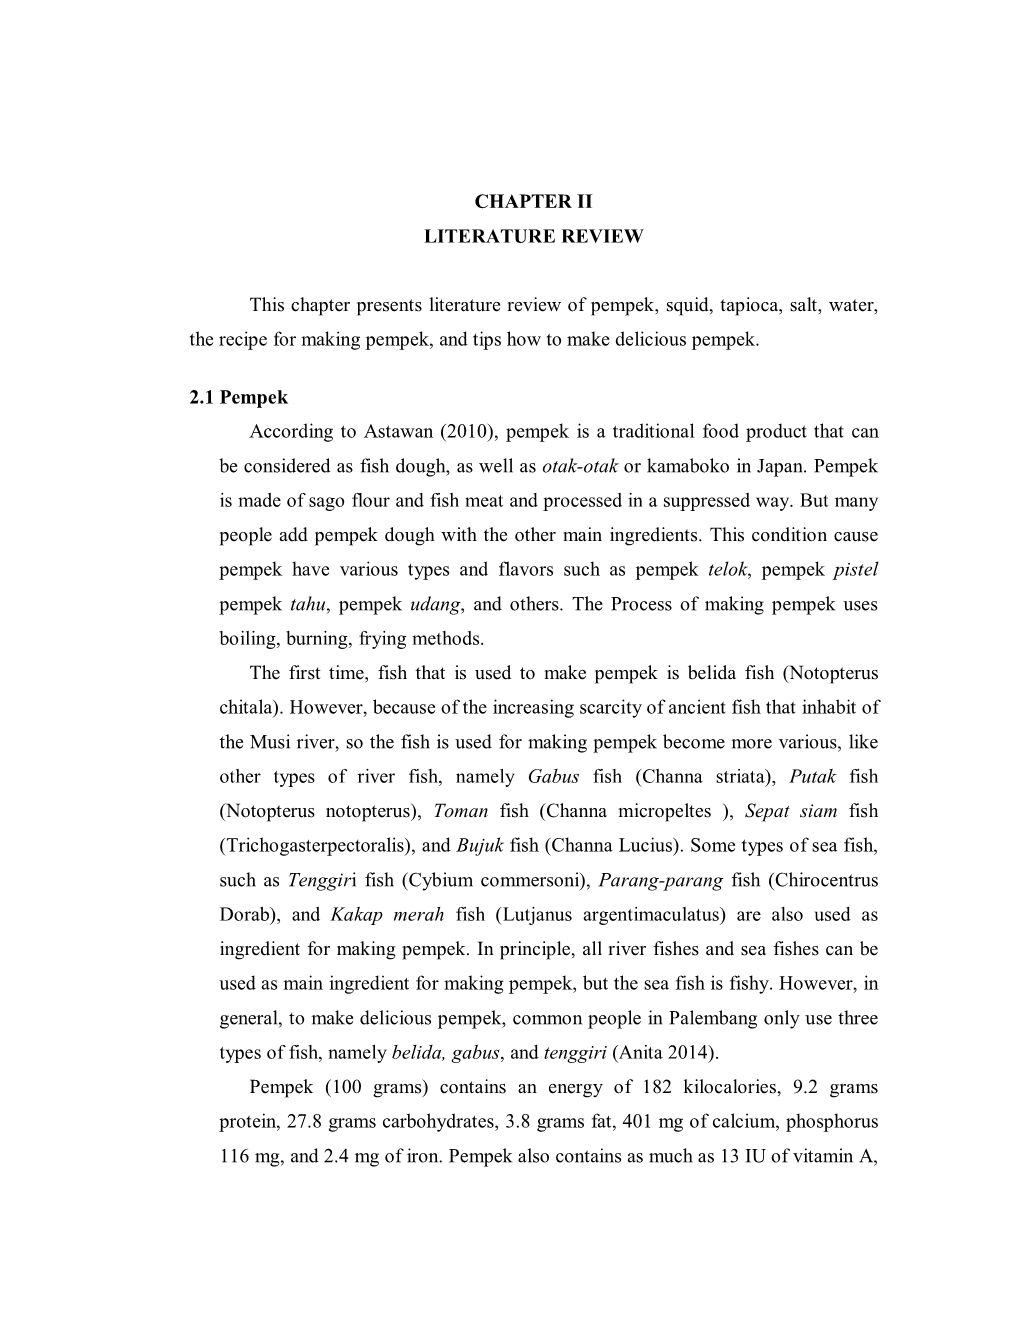 CHAPTER II LITERATURE REVIEW This Chapter Presents Literature Review of Pempek, Squid, Tapioca, Salt, Water, the Recipe for Maki